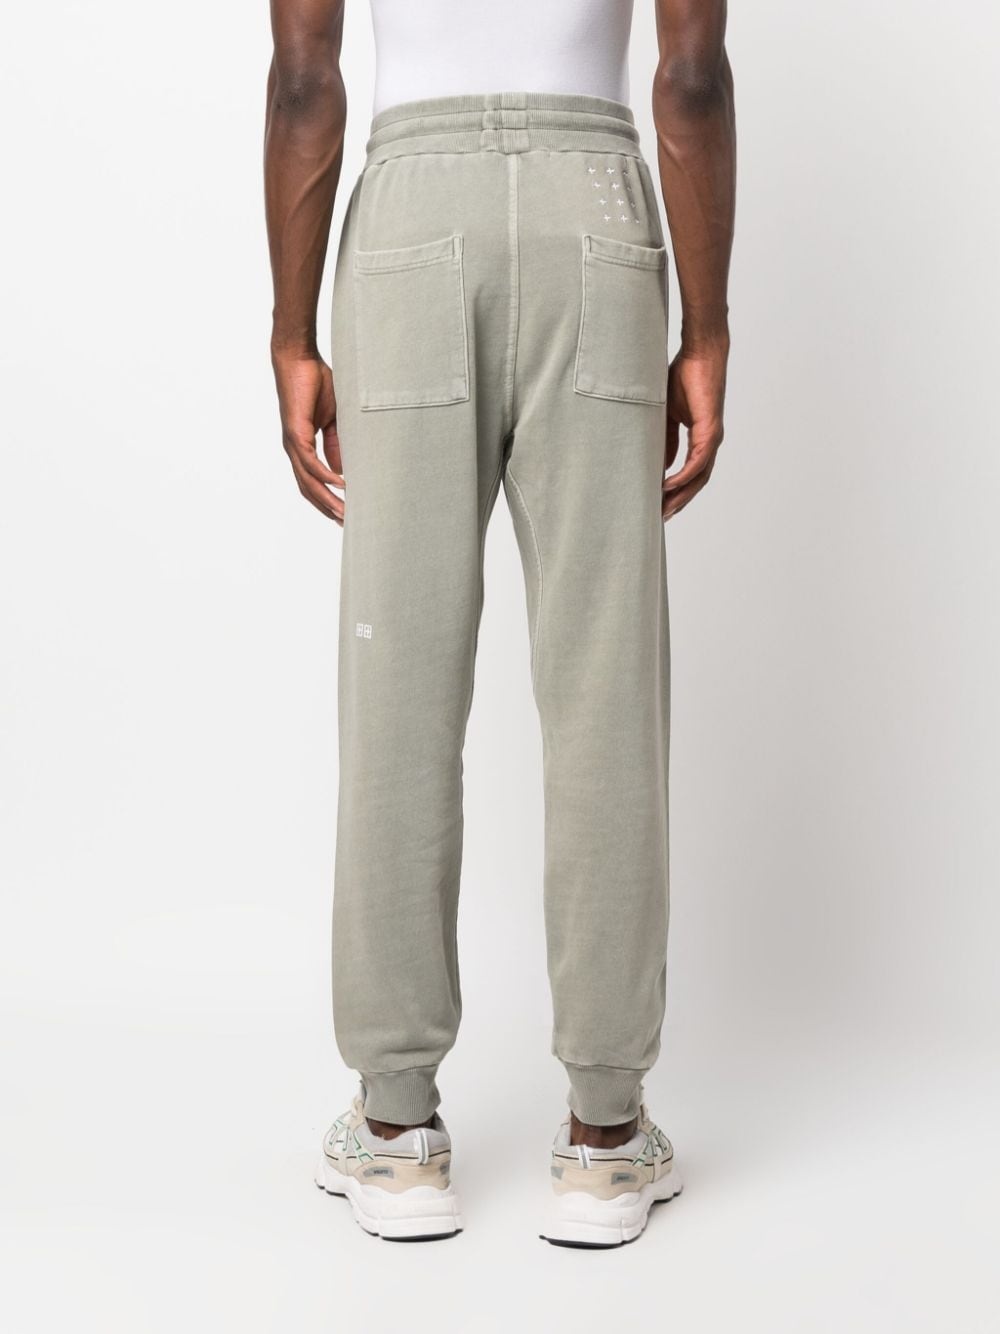 Trak Outback faded-effect track pants - 4